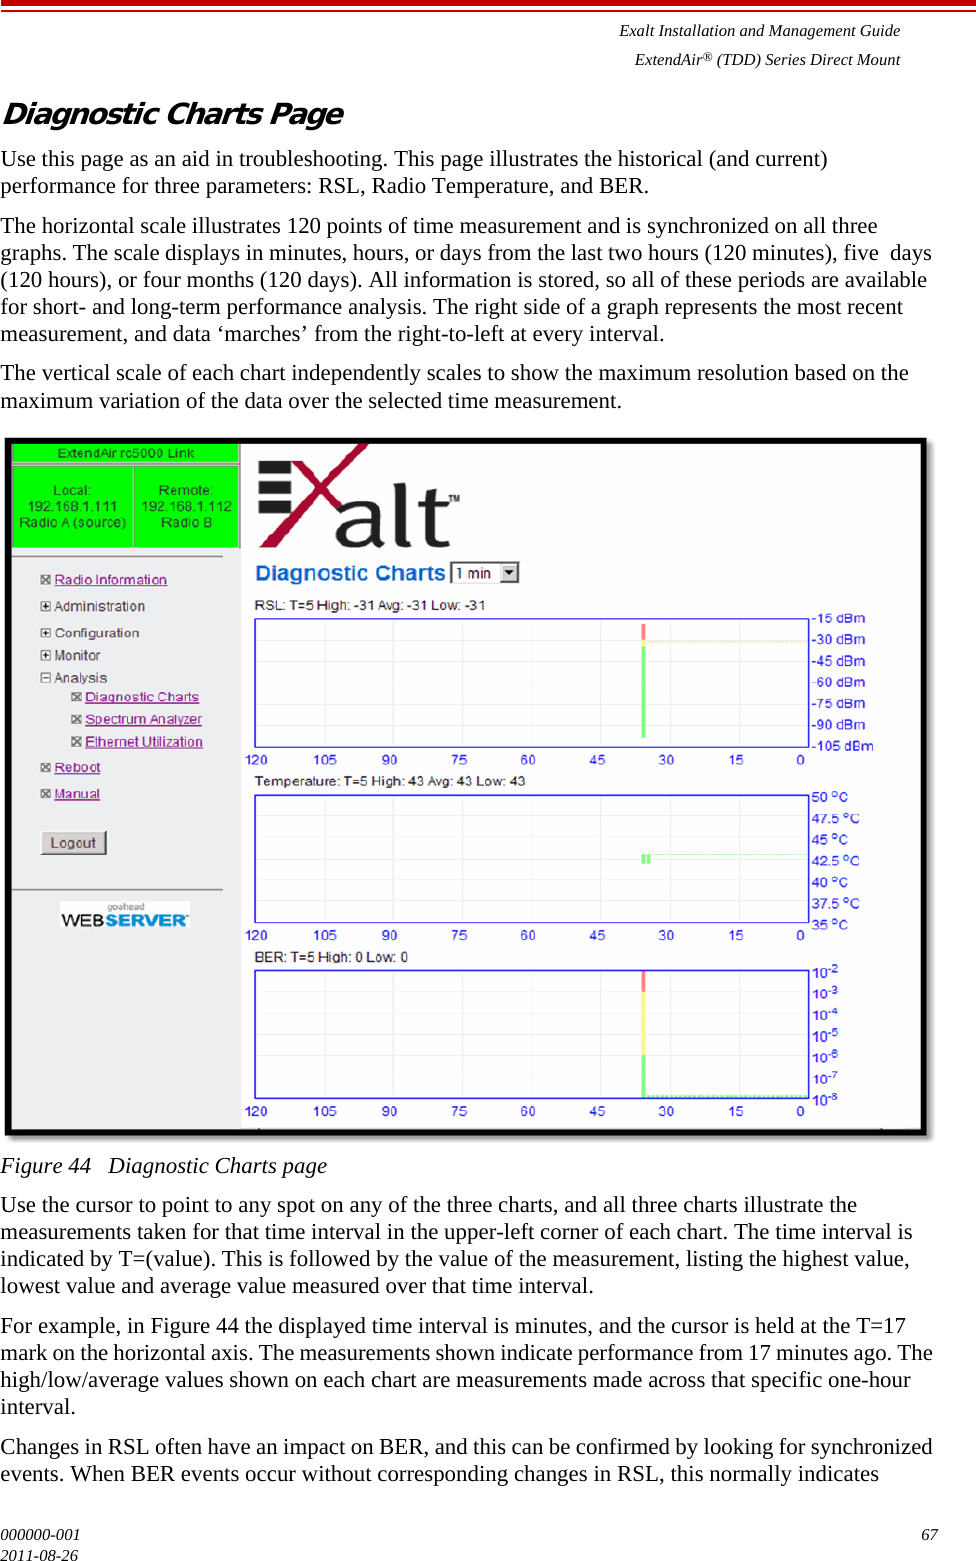 Exalt Installation and Management GuideExtendAir® (TDD) Series Direct Mount000000-001 672011-08-26Diagnostic Charts PageUse this page as an aid in troubleshooting. This page illustrates the historical (and current) performance for three parameters: RSL, Radio Temperature, and BER.The horizontal scale illustrates 120 points of time measurement and is synchronized on all three graphs. The scale displays in minutes, hours, or days from the last two hours (120 minutes), five  days (120 hours), or four months (120 days). All information is stored, so all of these periods are available for short- and long-term performance analysis. The right side of a graph represents the most recent measurement, and data ‘marches’ from the right-to-left at every interval.The vertical scale of each chart independently scales to show the maximum resolution based on the maximum variation of the data over the selected time measurement. Figure 44   Diagnostic Charts pageUse the cursor to point to any spot on any of the three charts, and all three charts illustrate the measurements taken for that time interval in the upper-left corner of each chart. The time interval is indicated by T=(value). This is followed by the value of the measurement, listing the highest value, lowest value and average value measured over that time interval.For example, in Figure 44 the displayed time interval is minutes, and the cursor is held at the T=17 mark on the horizontal axis. The measurements shown indicate performance from 17 minutes ago. The high/low/average values shown on each chart are measurements made across that specific one-hour interval.Changes in RSL often have an impact on BER, and this can be confirmed by looking for synchronized events. When BER events occur without corresponding changes in RSL, this normally indicates 